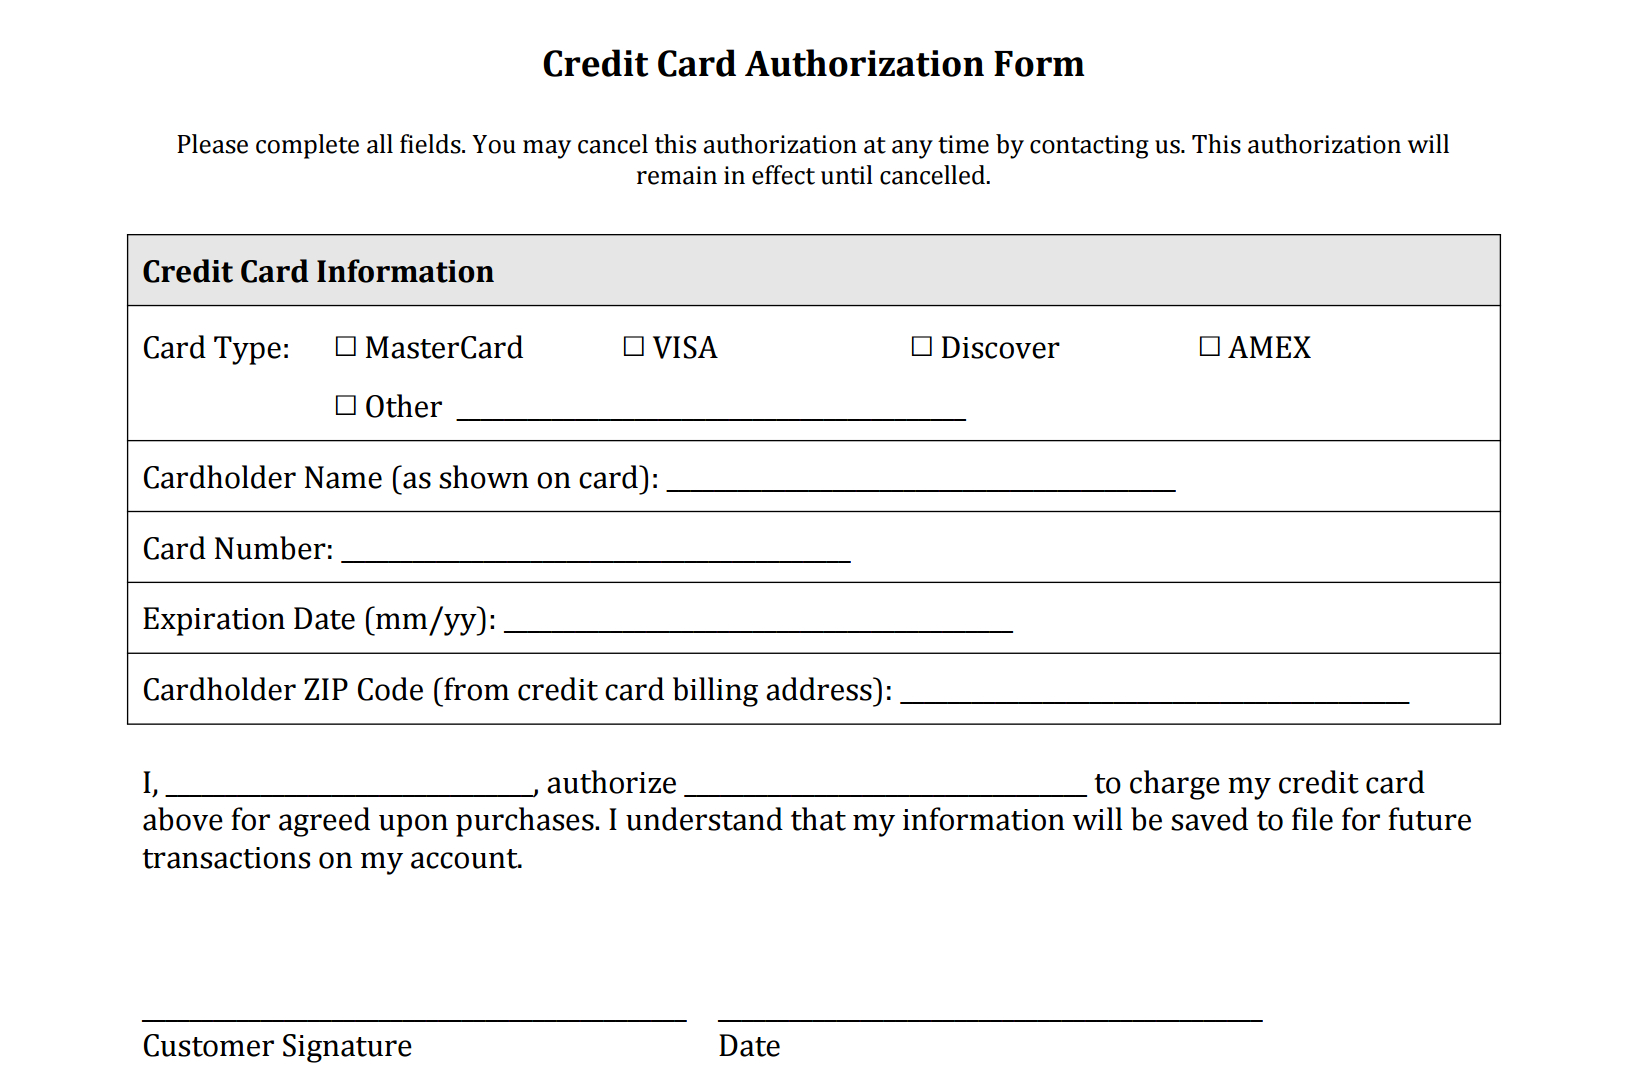 Credit Card Authorization Form Templates [Download] For Credit Card Authorization Form Template Word